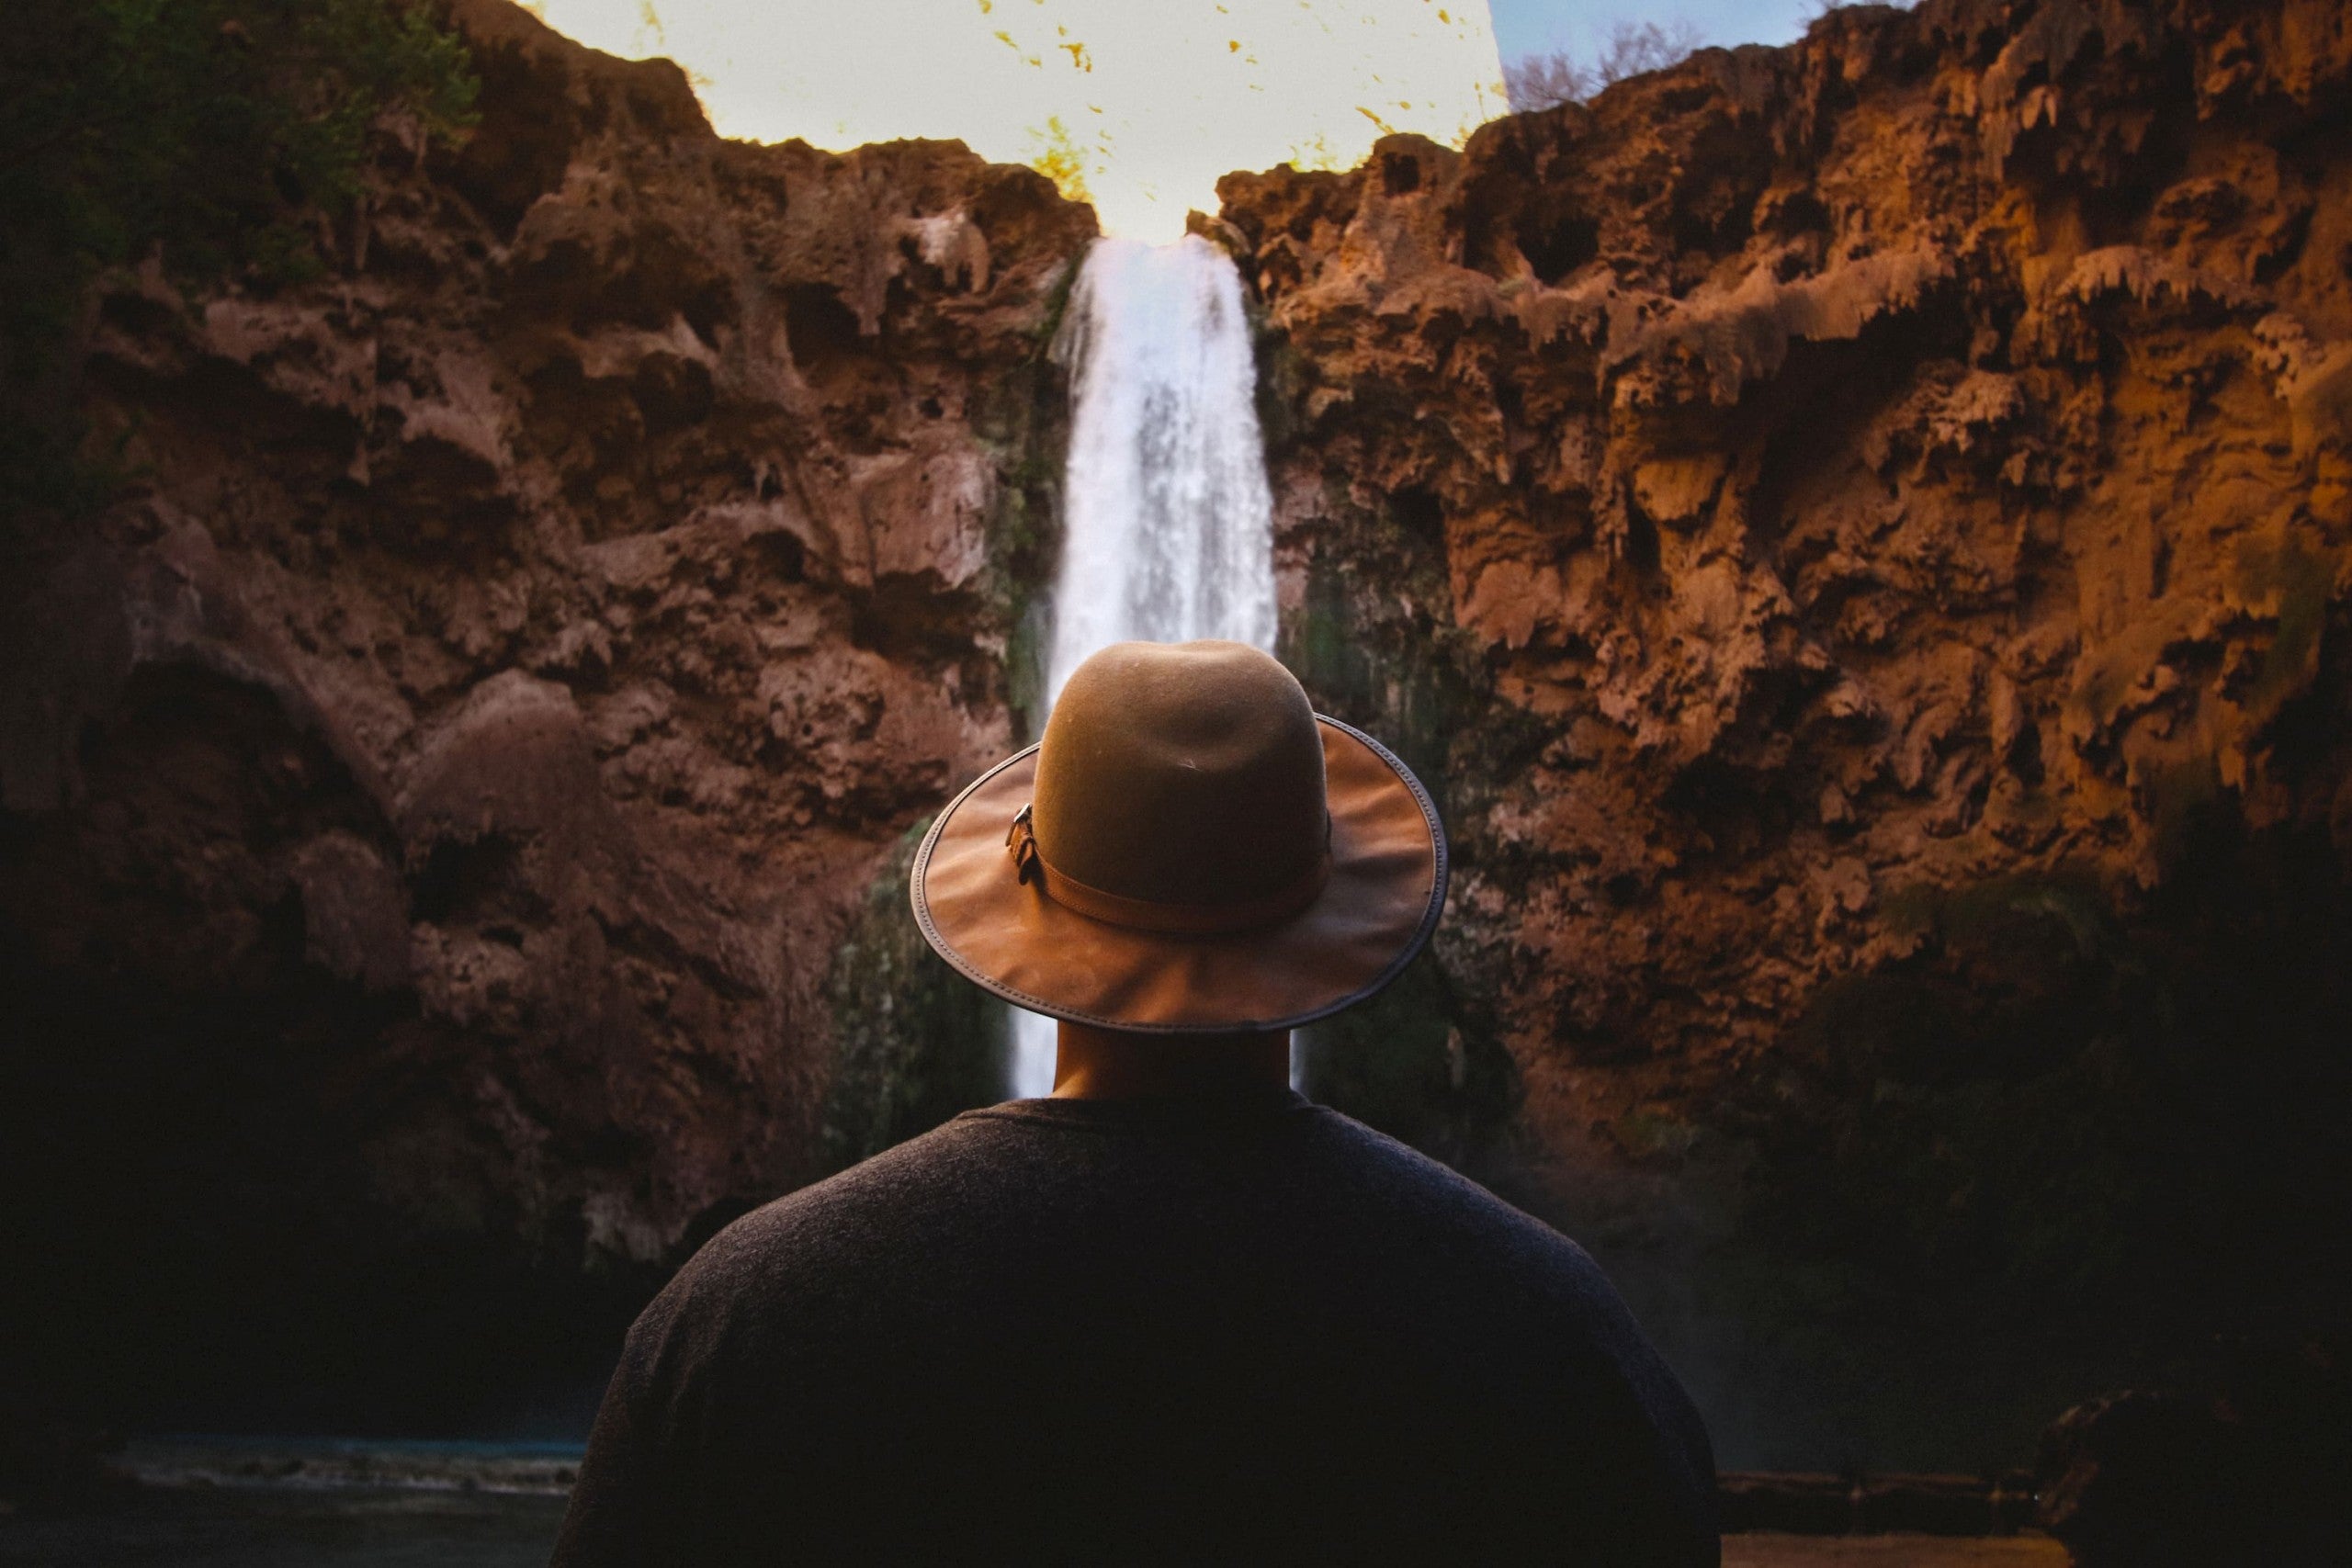 Man with hat standing in front of cascading waterfall.